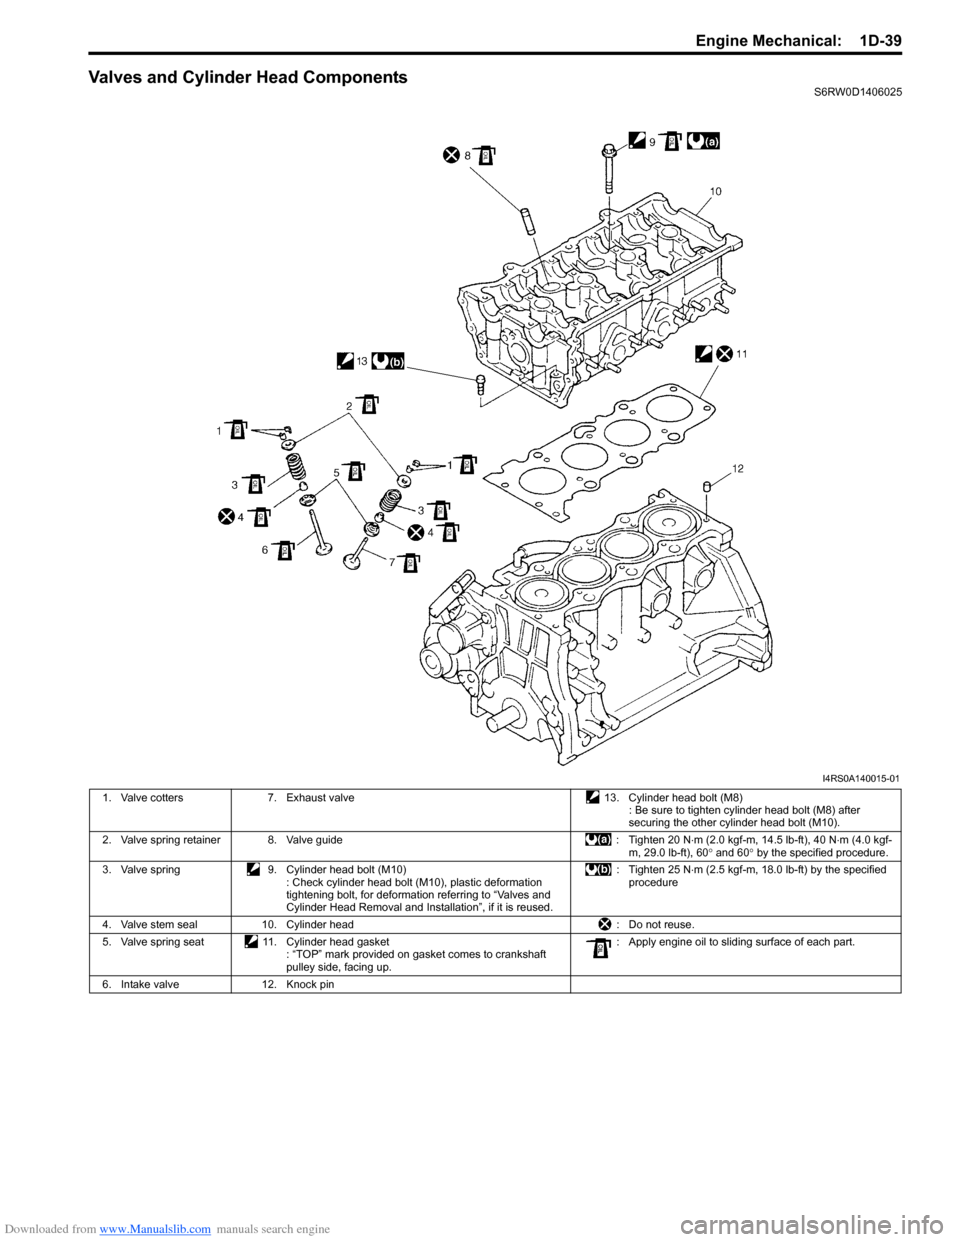 SUZUKI SX4 2006 1.G Service Service Manual Downloaded from www.Manualslib.com manuals search engine Engine Mechanical:  1D-39
Valves and Cylinder Head ComponentsS6RW0D1406025
I4RS0A140015-01
1. Valve cotters 7. Exhaust valve 13. Cylinder head 